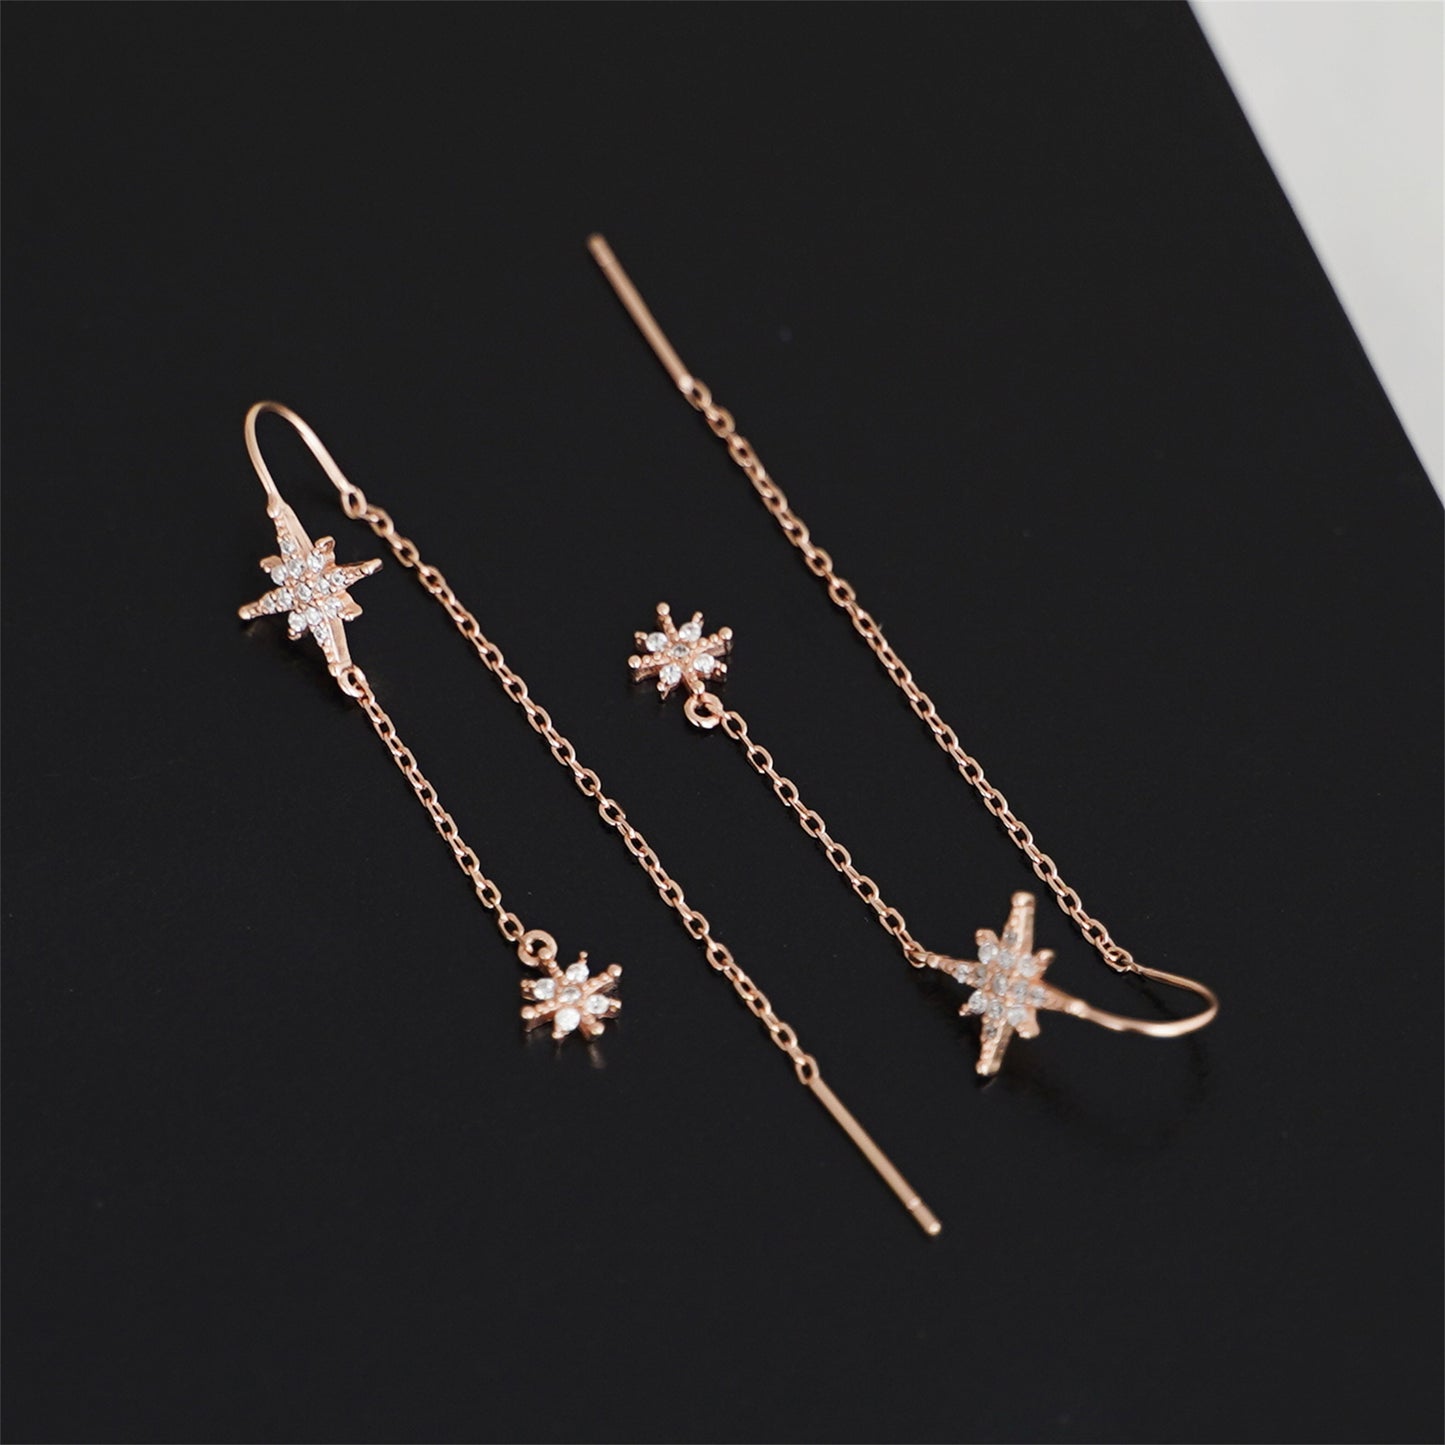 Rose Gold Threader Earrings with Paved CZ Pole Star Chain Drops - sugarkittenlondon